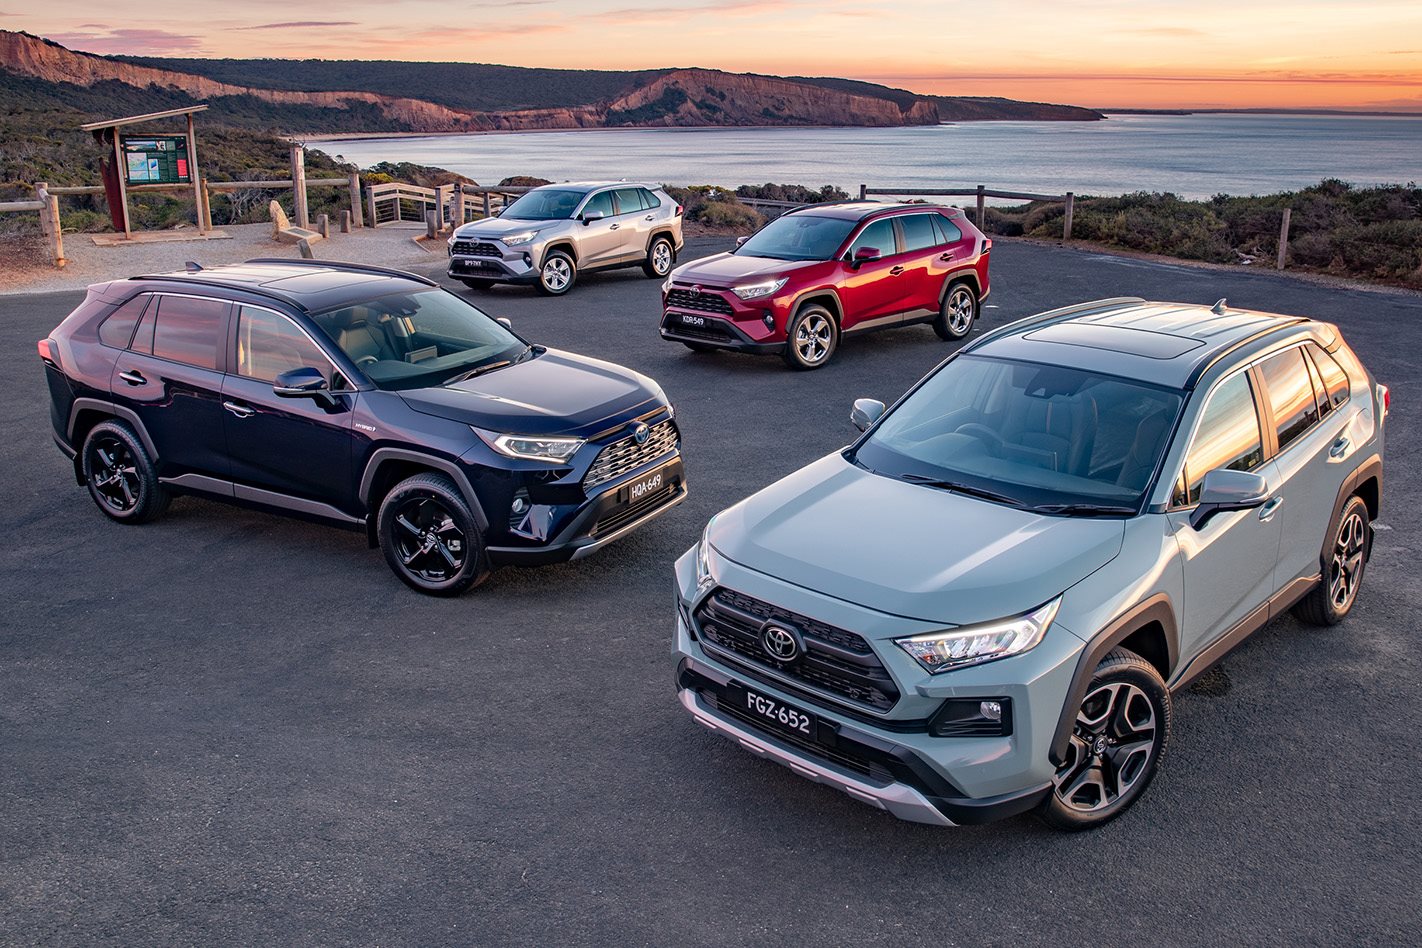 2019 Toyota RAV4  prices confirmed for volumeselling SUV